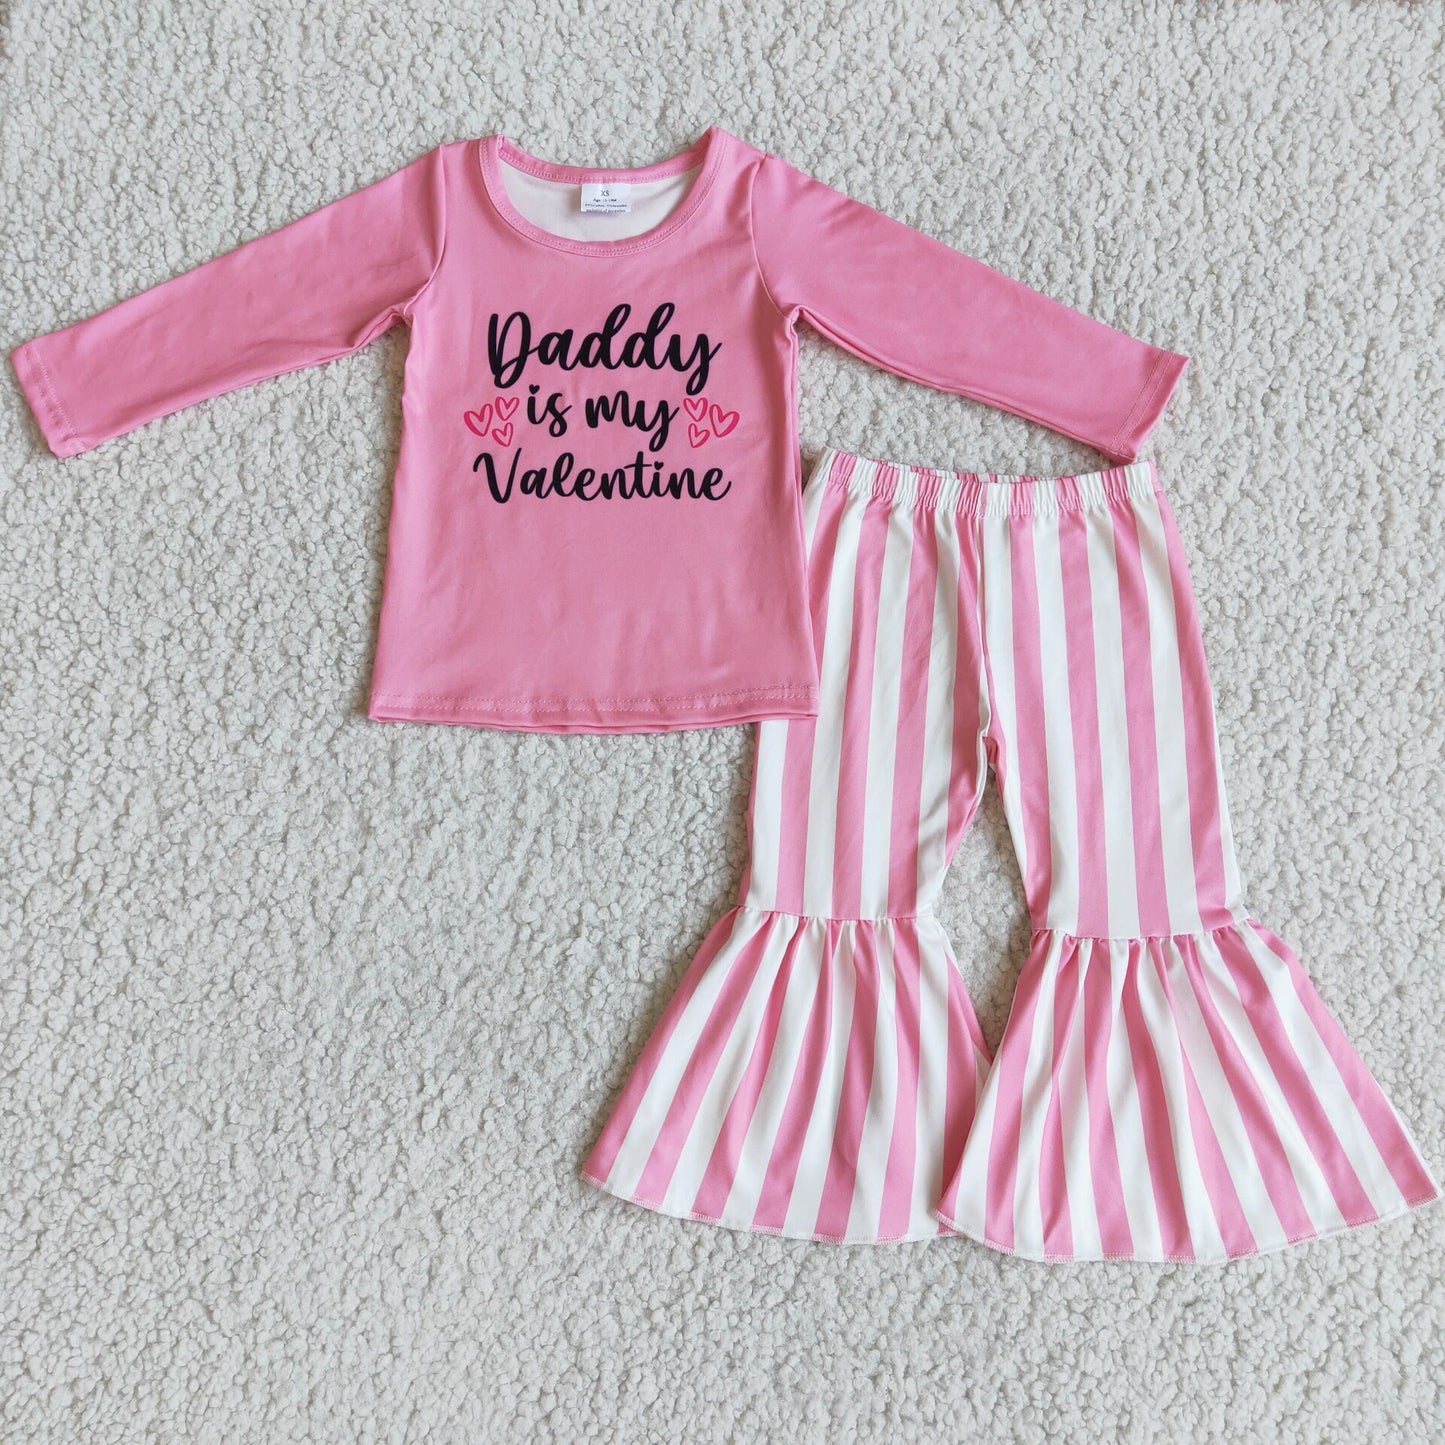 Daddy is my valentine pink shirt stripe pants girls boutique clothes